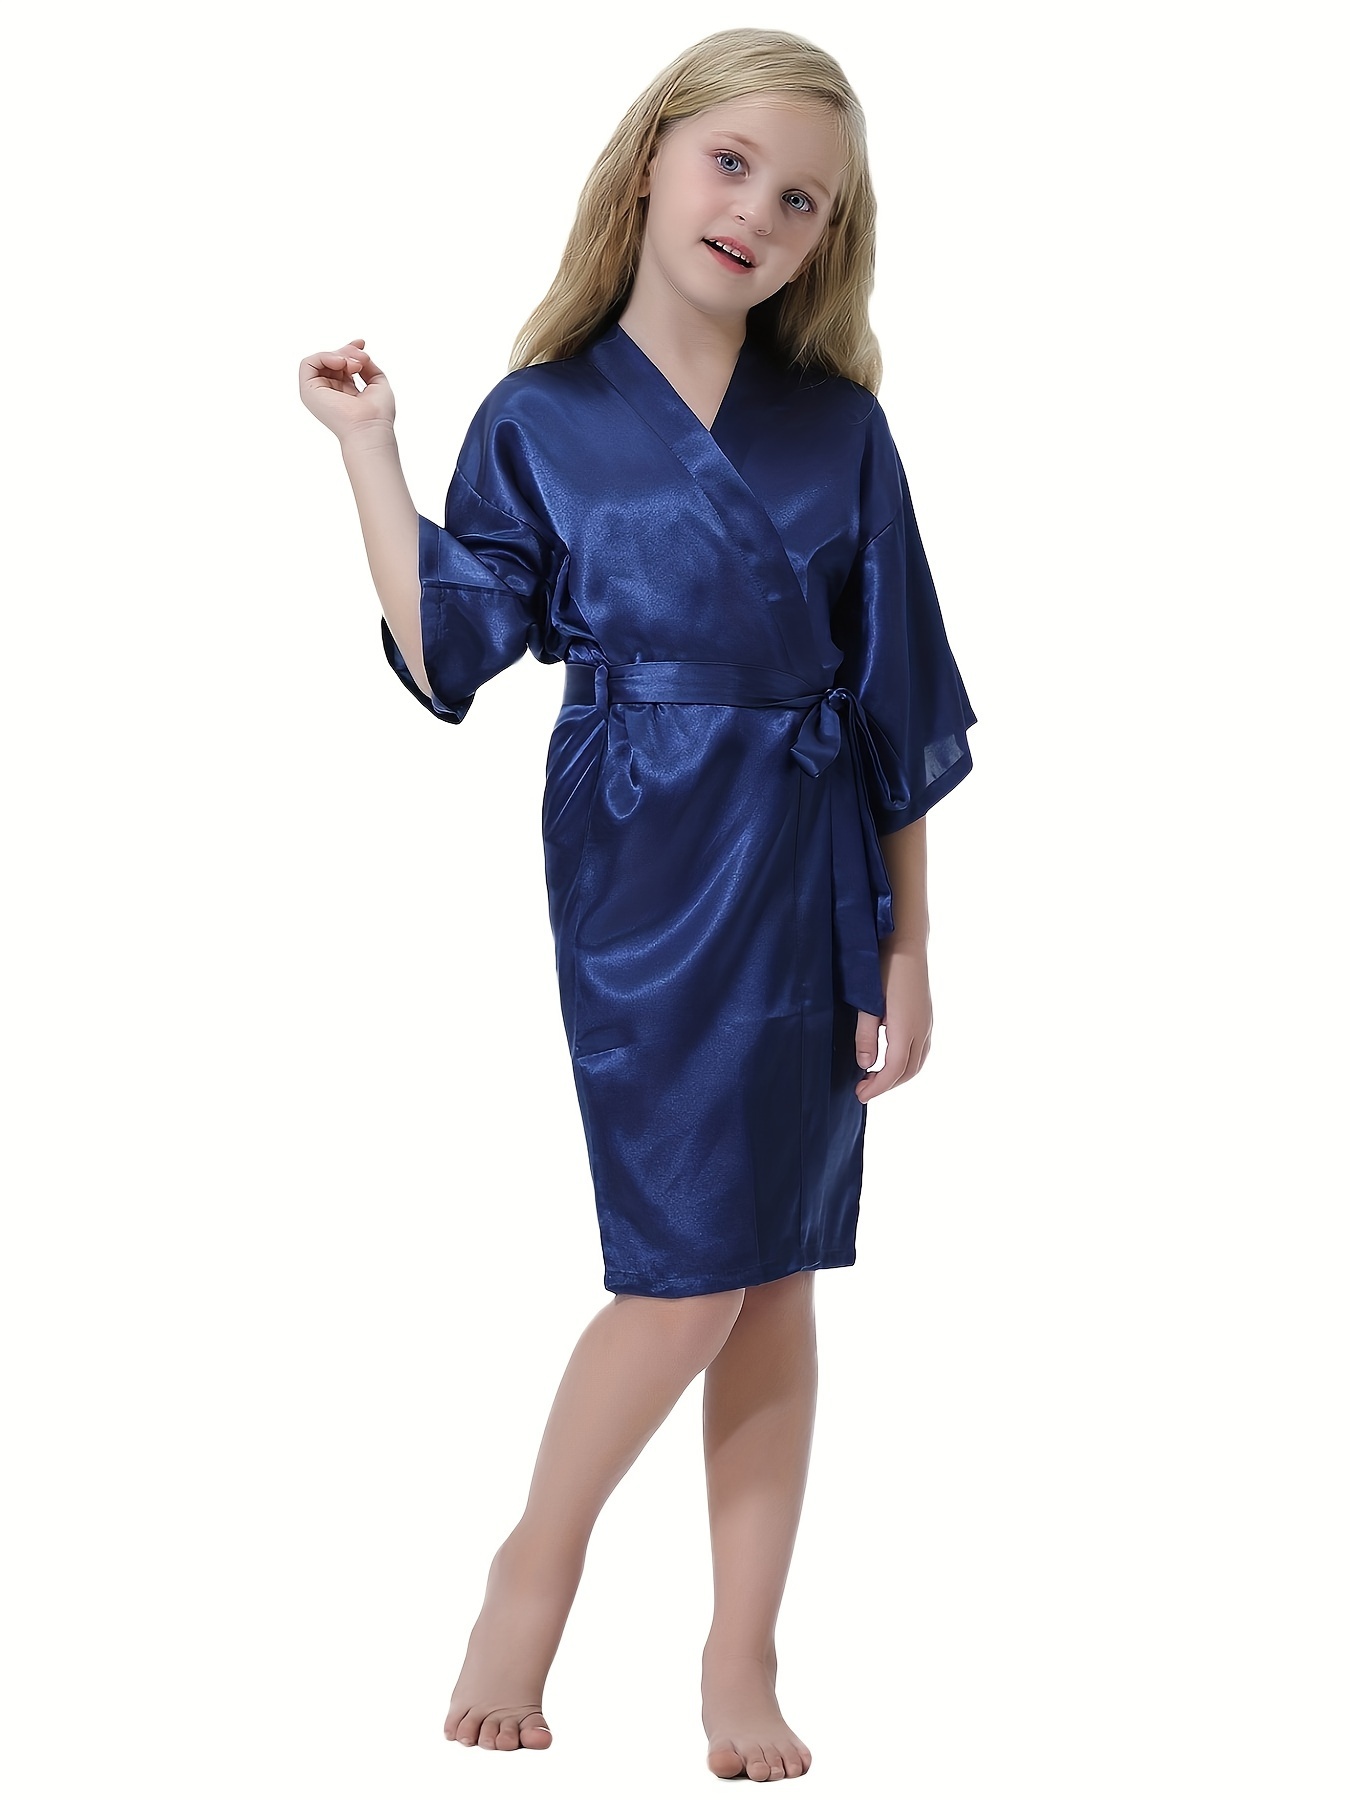 Little Girls Floral Silk Satin Kimono Clothess Outfits Homewear Clothes  Short Clothes for Wedding Birthday Party Spa